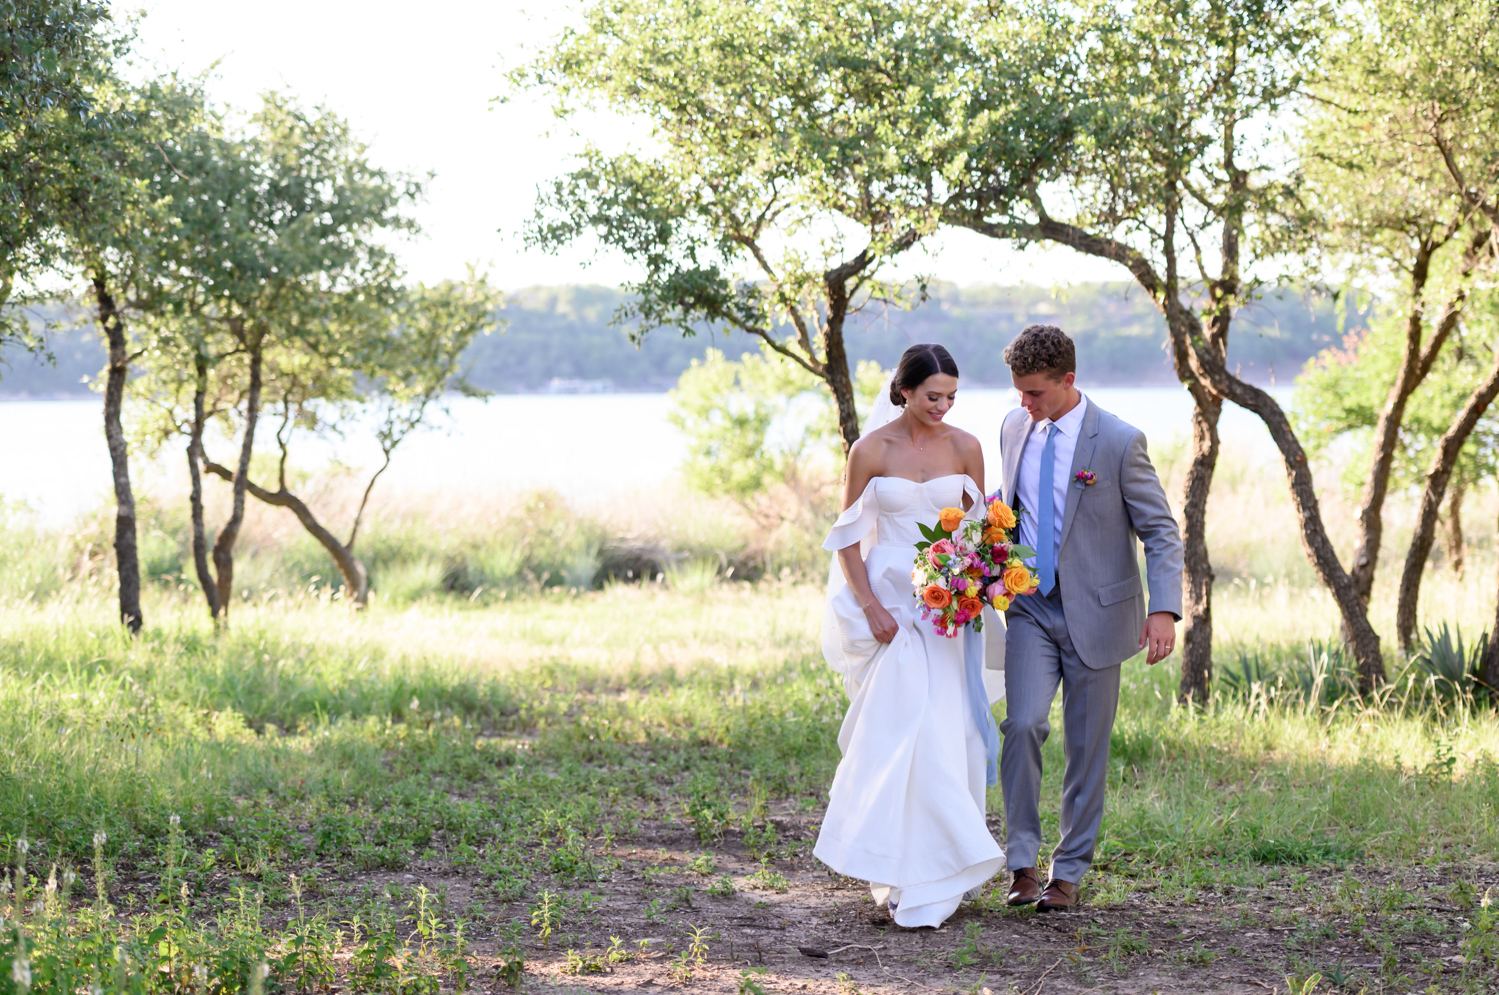 Bride and groom walking with colorful bridal bouquet 